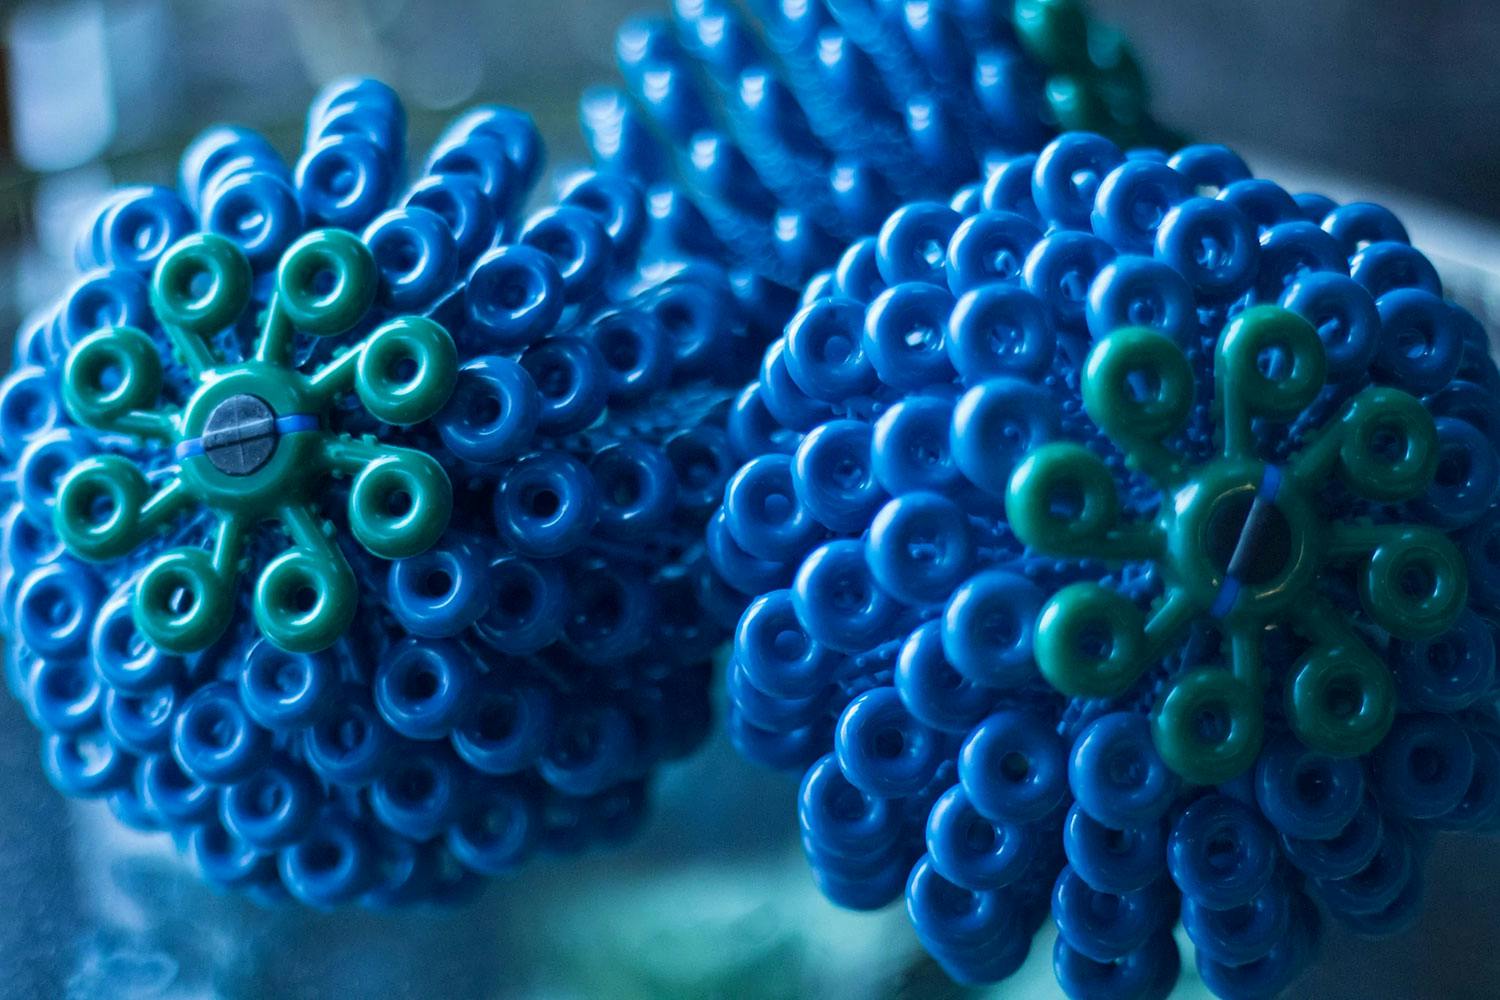 Three cora balls—blue plastic balls with ring-shaped protrusions that mimic coral that capture microplastics in the laundry.